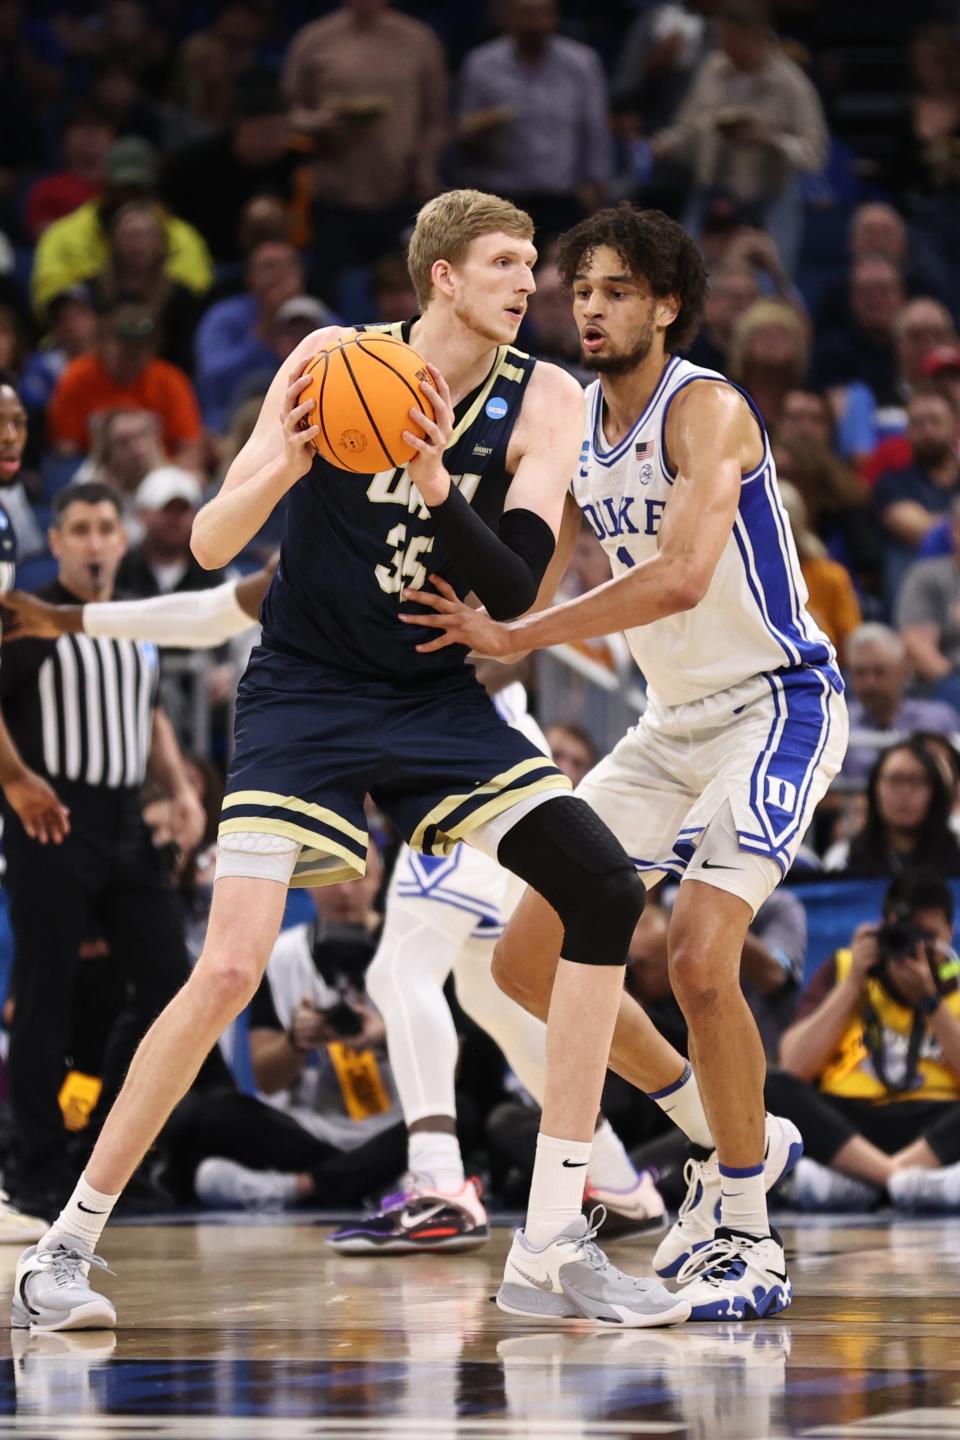 Mar 16, 2023; Orlando, FL, USA; Oral Roberts Golden Eagles forward Connor Vanover (35) controls the ball while defended by Duke Blue Devils center Dereck Lively II (1) during the first half at Amway Center. Mandatory Credit: Matt Pendleton-USA TODAY Sports